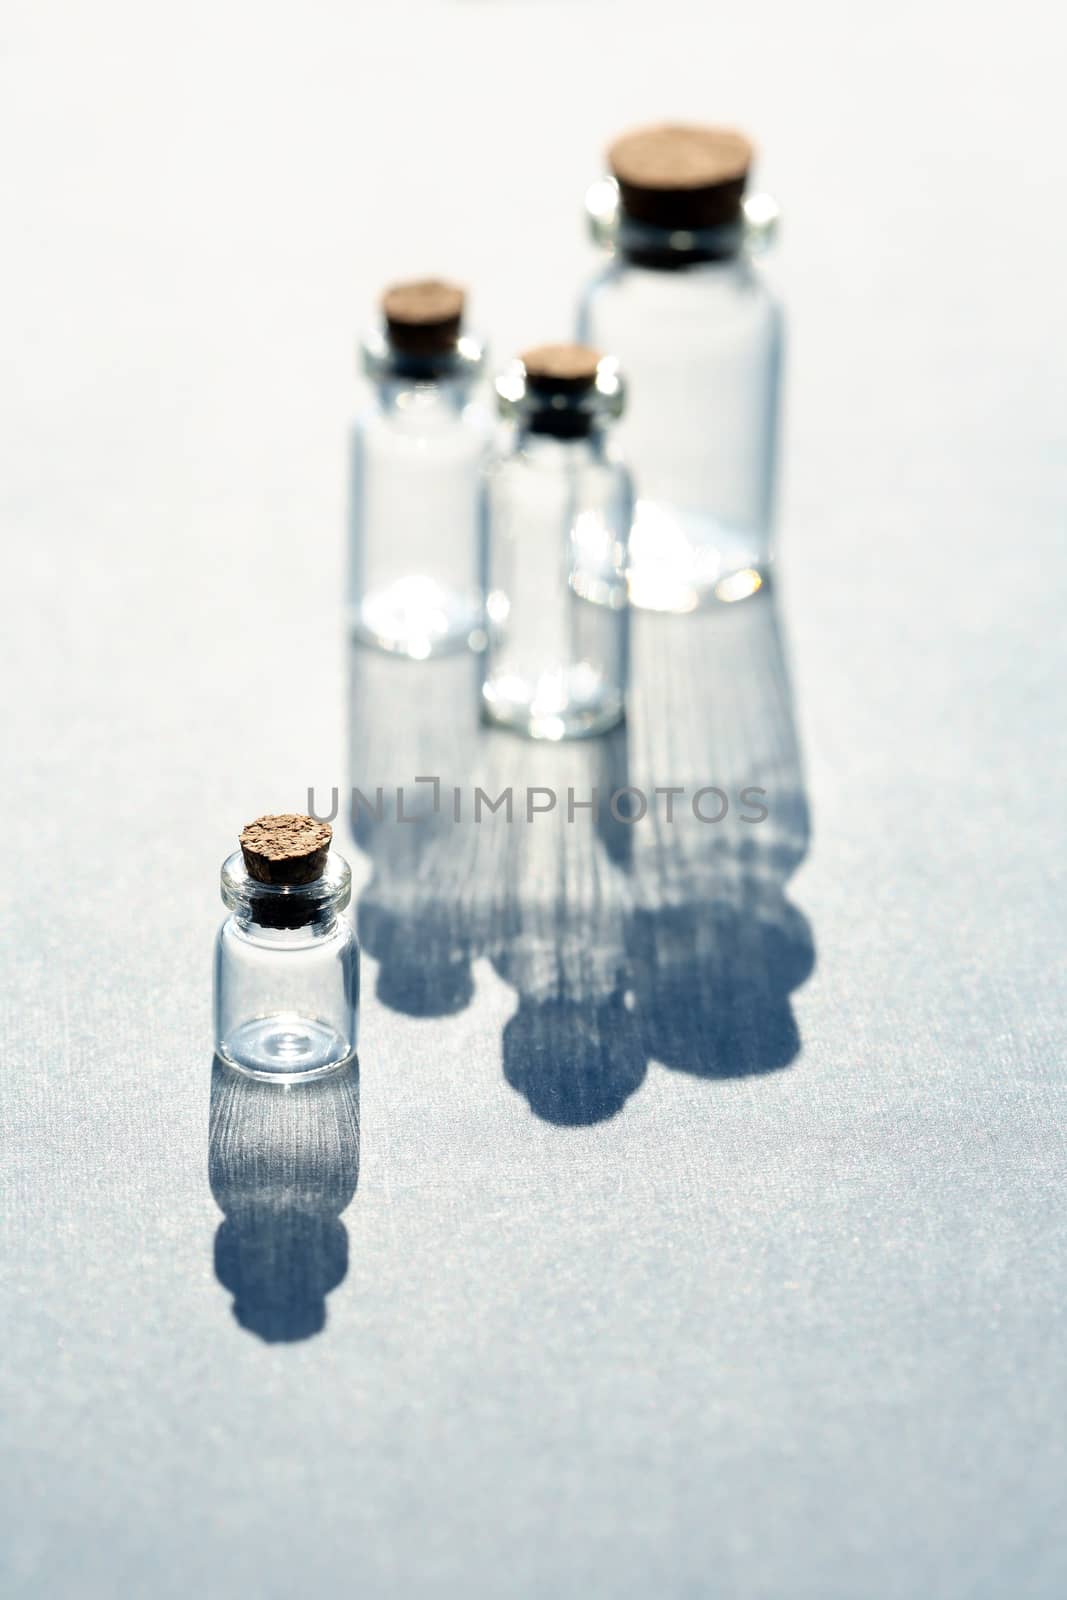 Set of small bottles with long shadow on white background